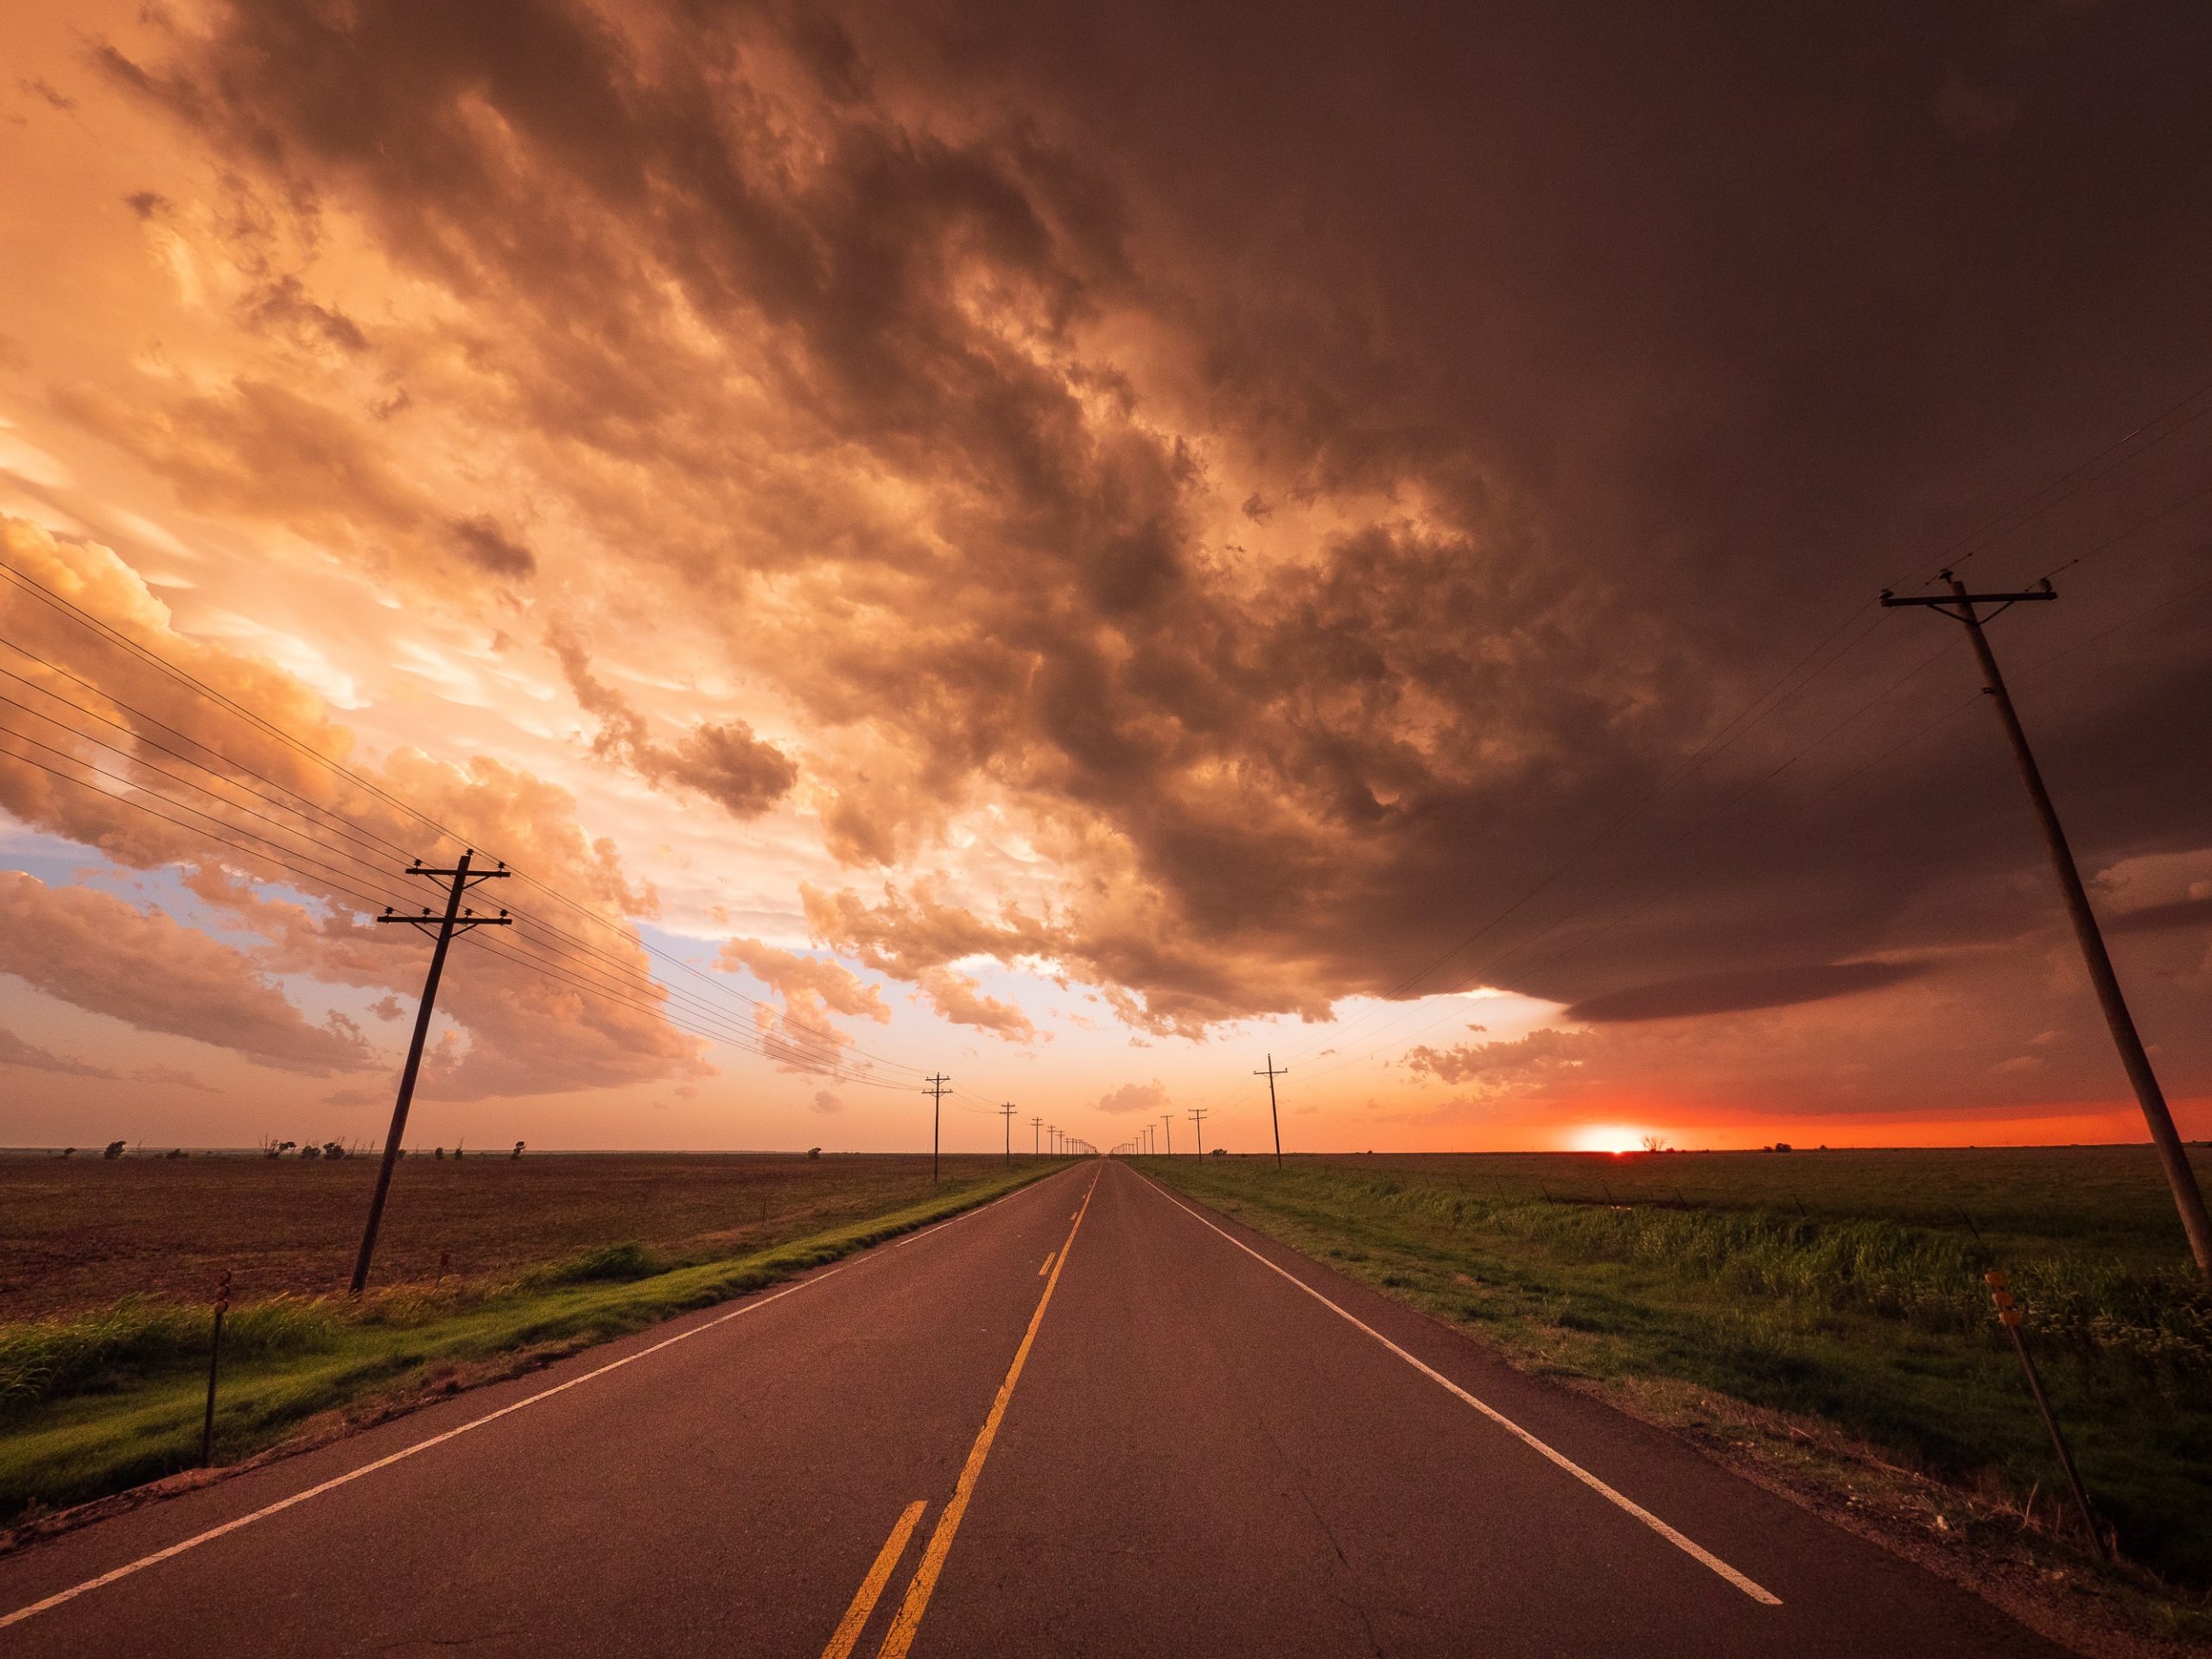 A photograph of a long, straight road lined with utility poles going off into the distance. On either side of the road are empty green fields. The sky is filled with dark grey clouds which are coloured by the golden-orange sunset. The sun is also depicted setting on the right side of the photo.